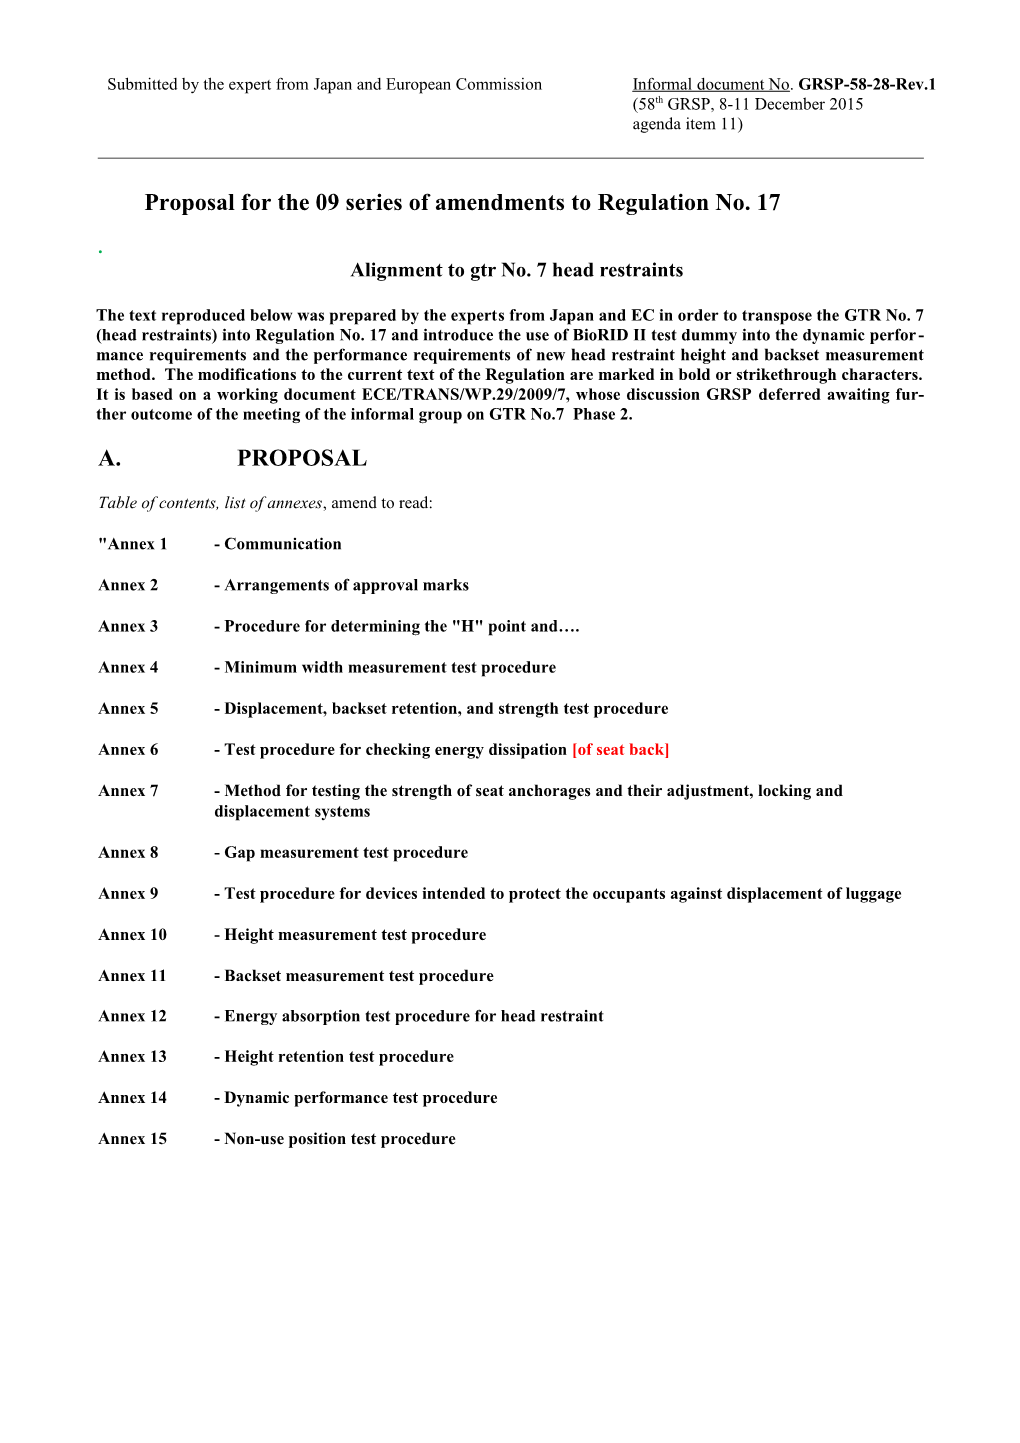 Proposal for the 09 Series of Amendments to Regulation No. 17